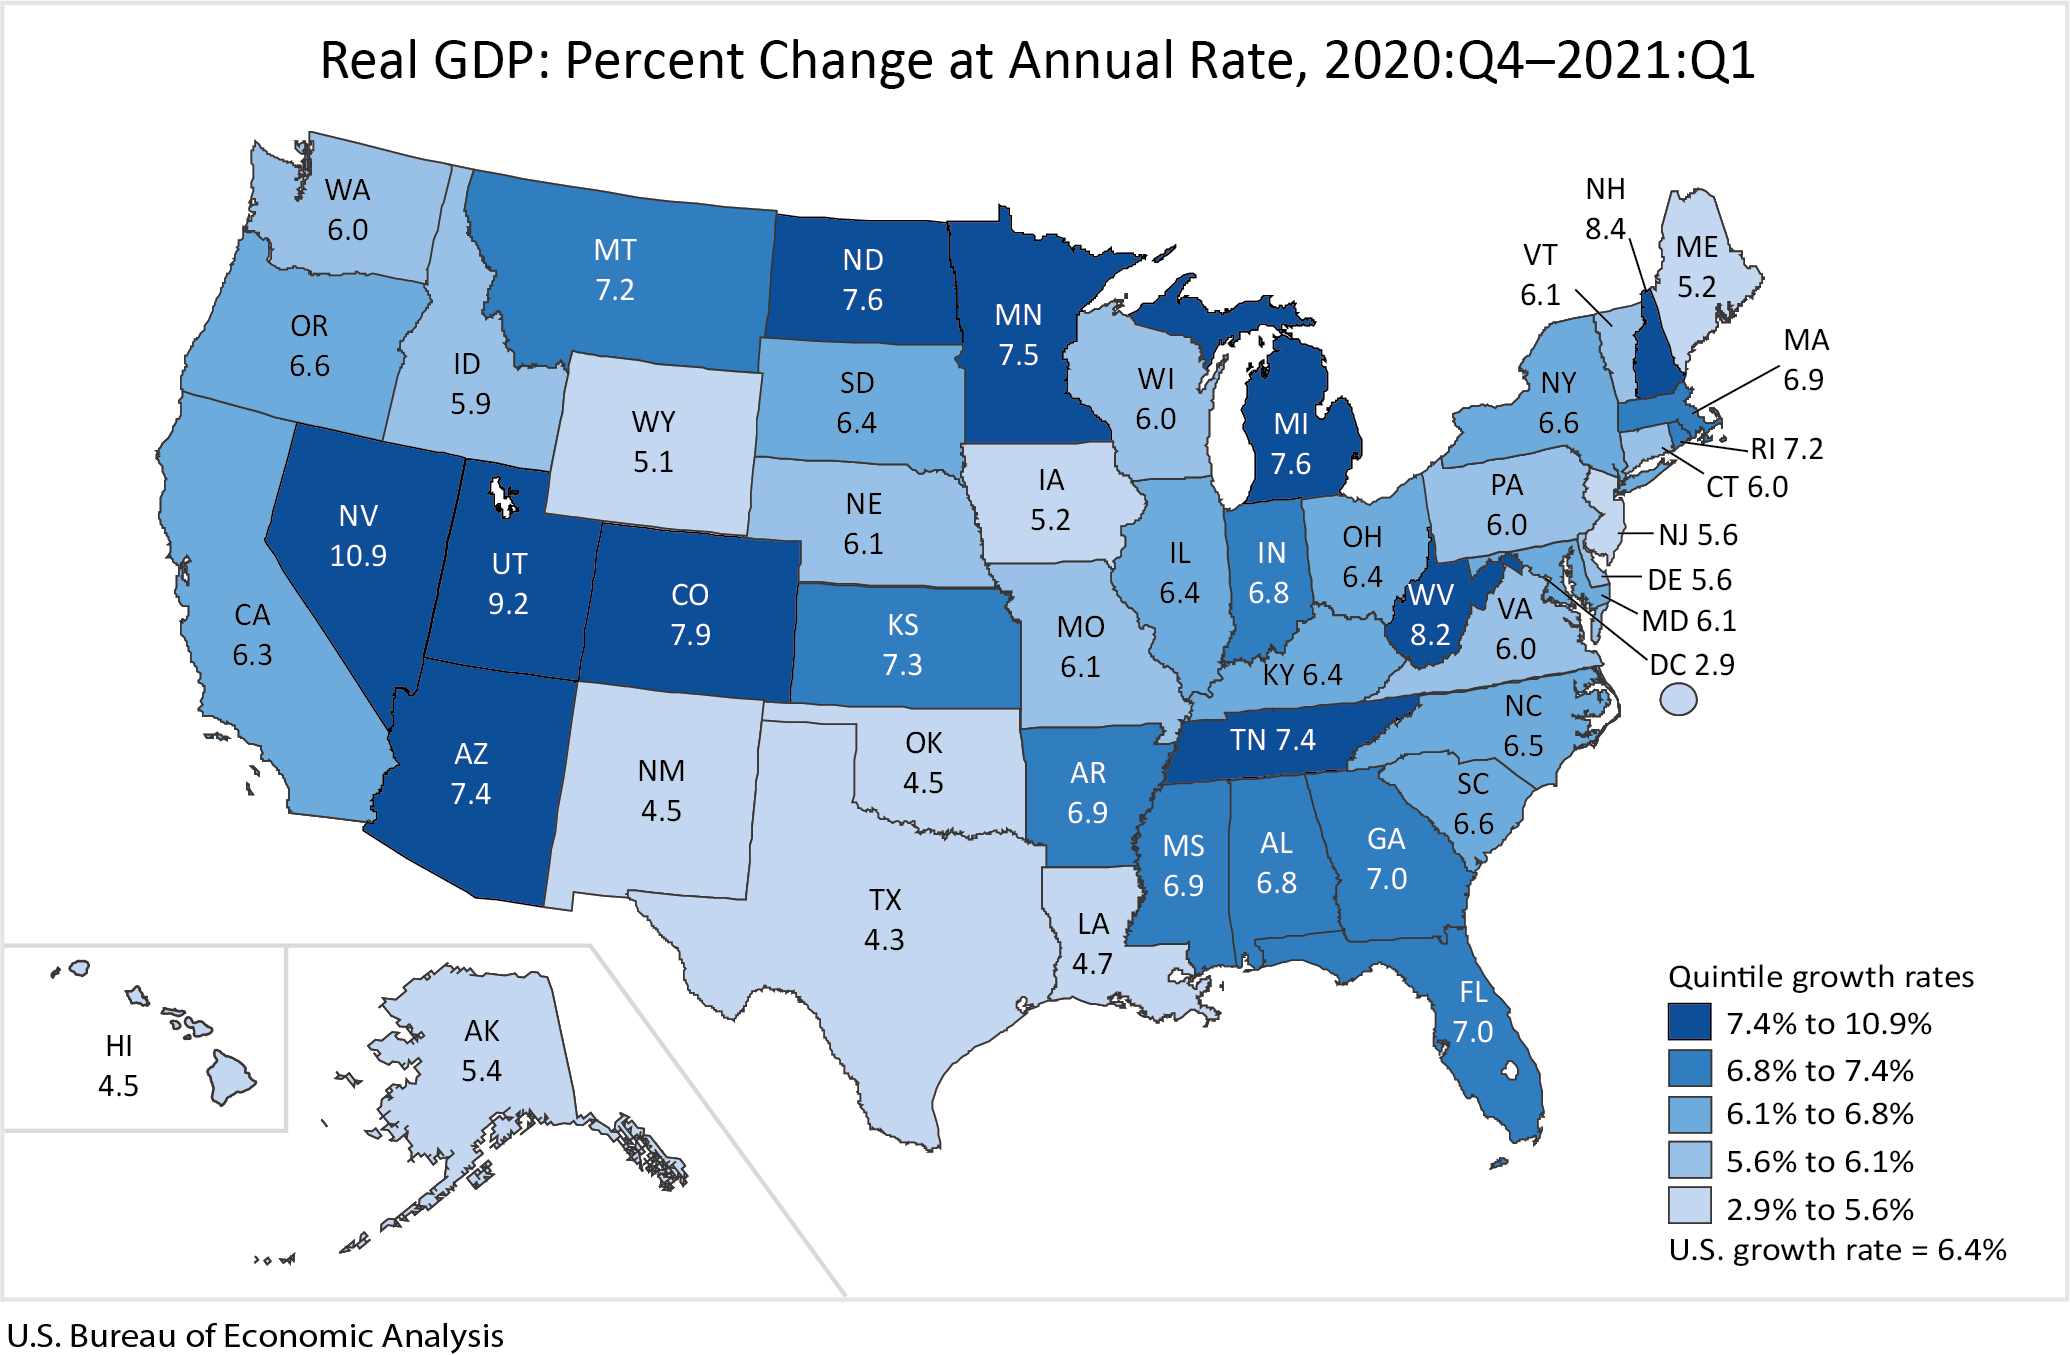 Real GDP: Percent Change at Annual Rate, 2020:Q4-2021:Q1